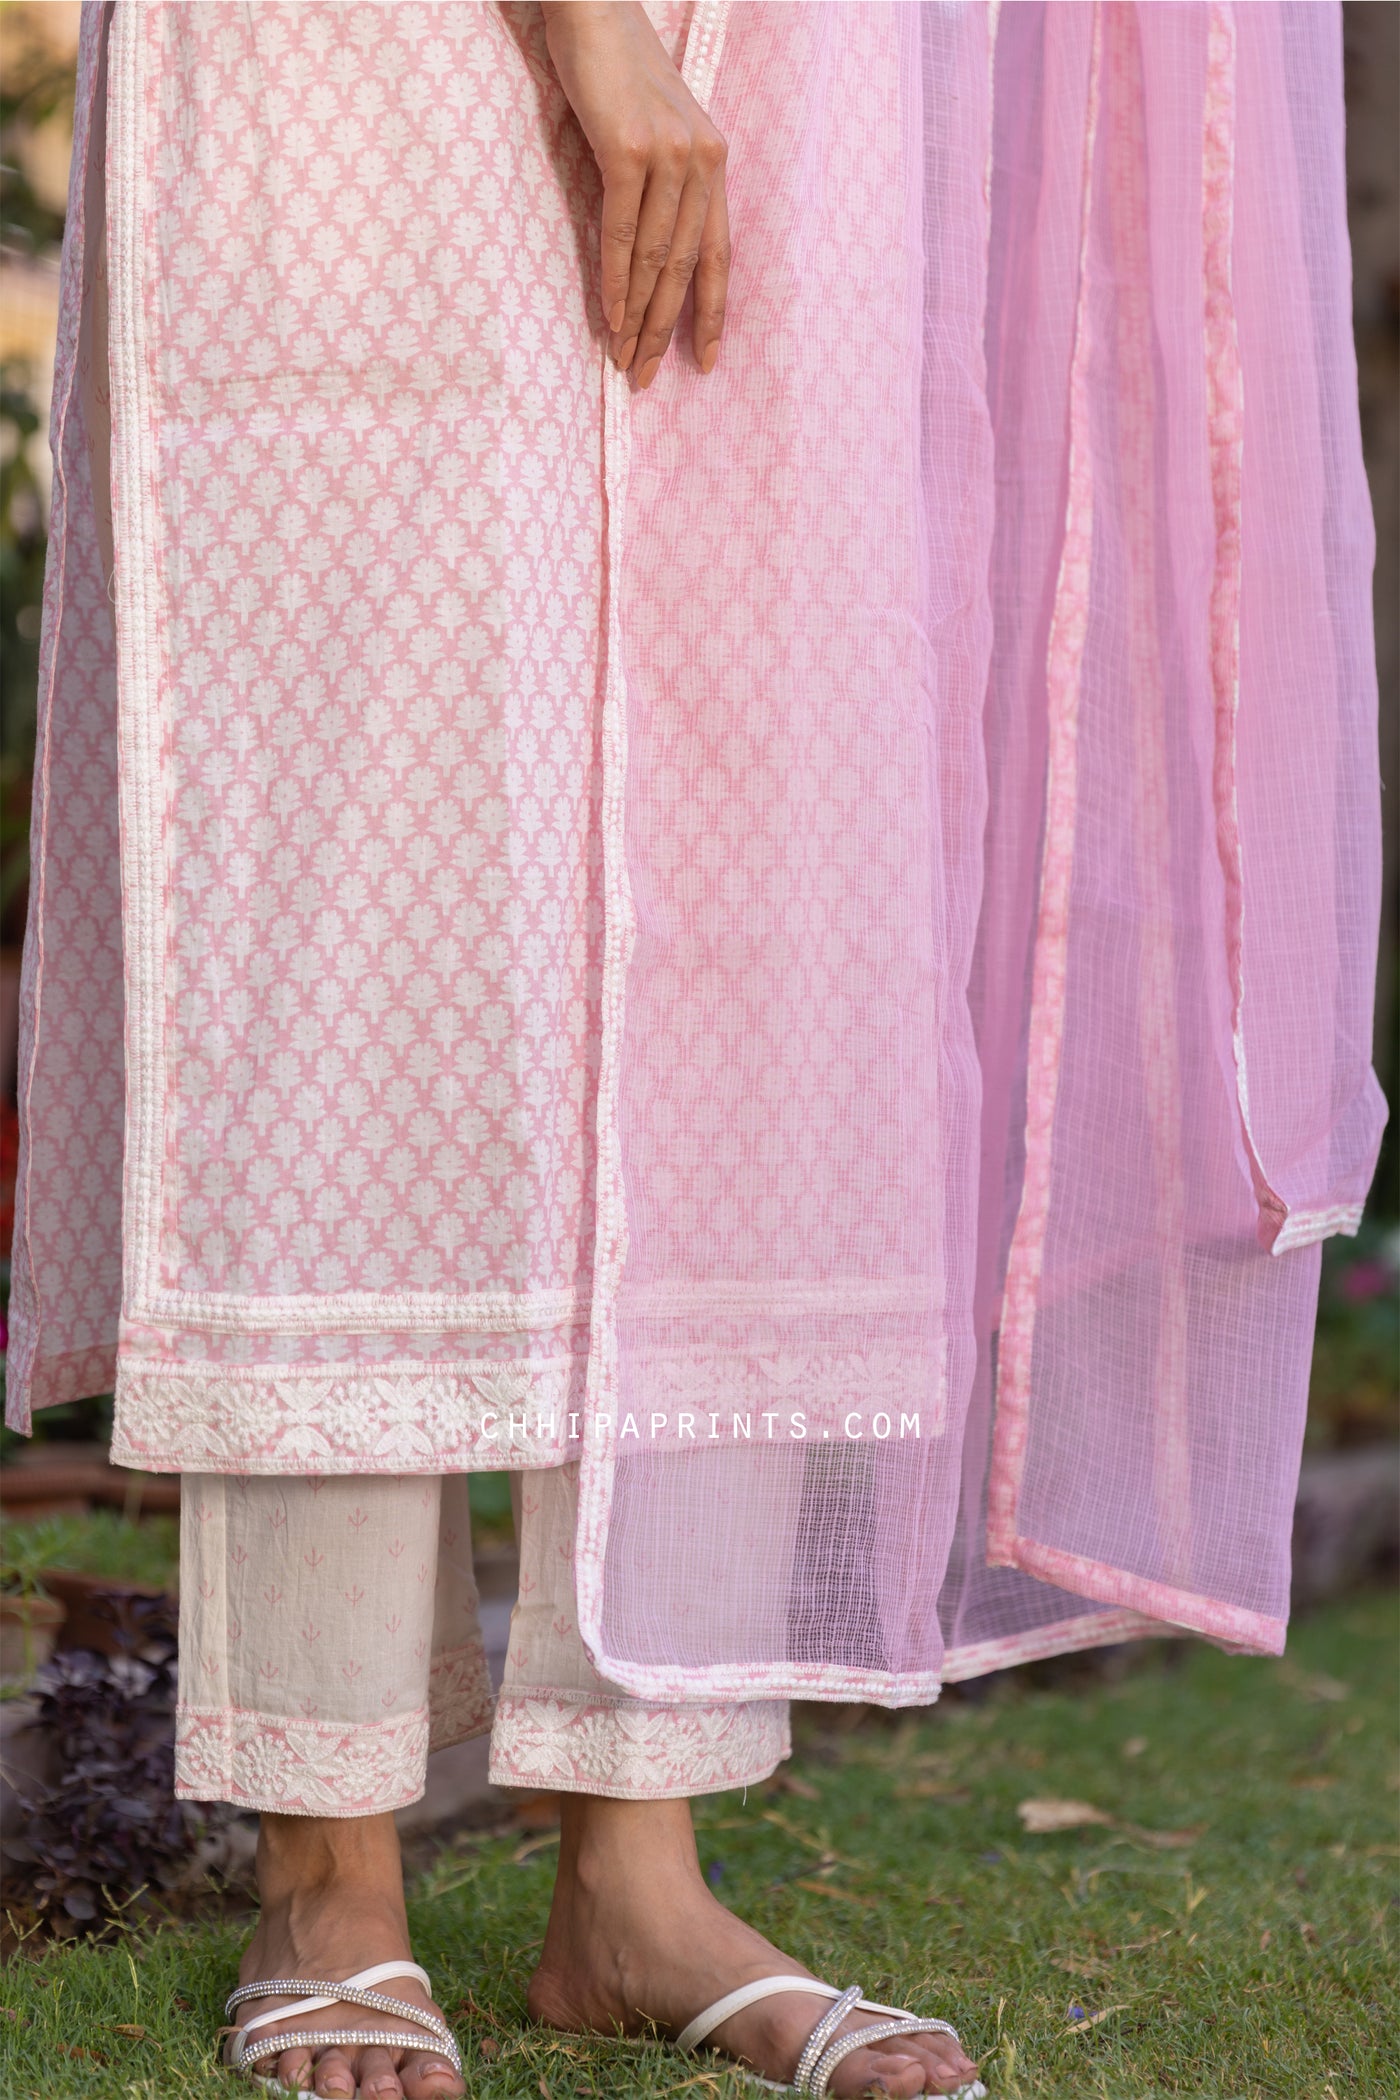 Cotton Gud Buti Embroidery Suit Set from Mehak Collection in Baby Pink (Set of 3)